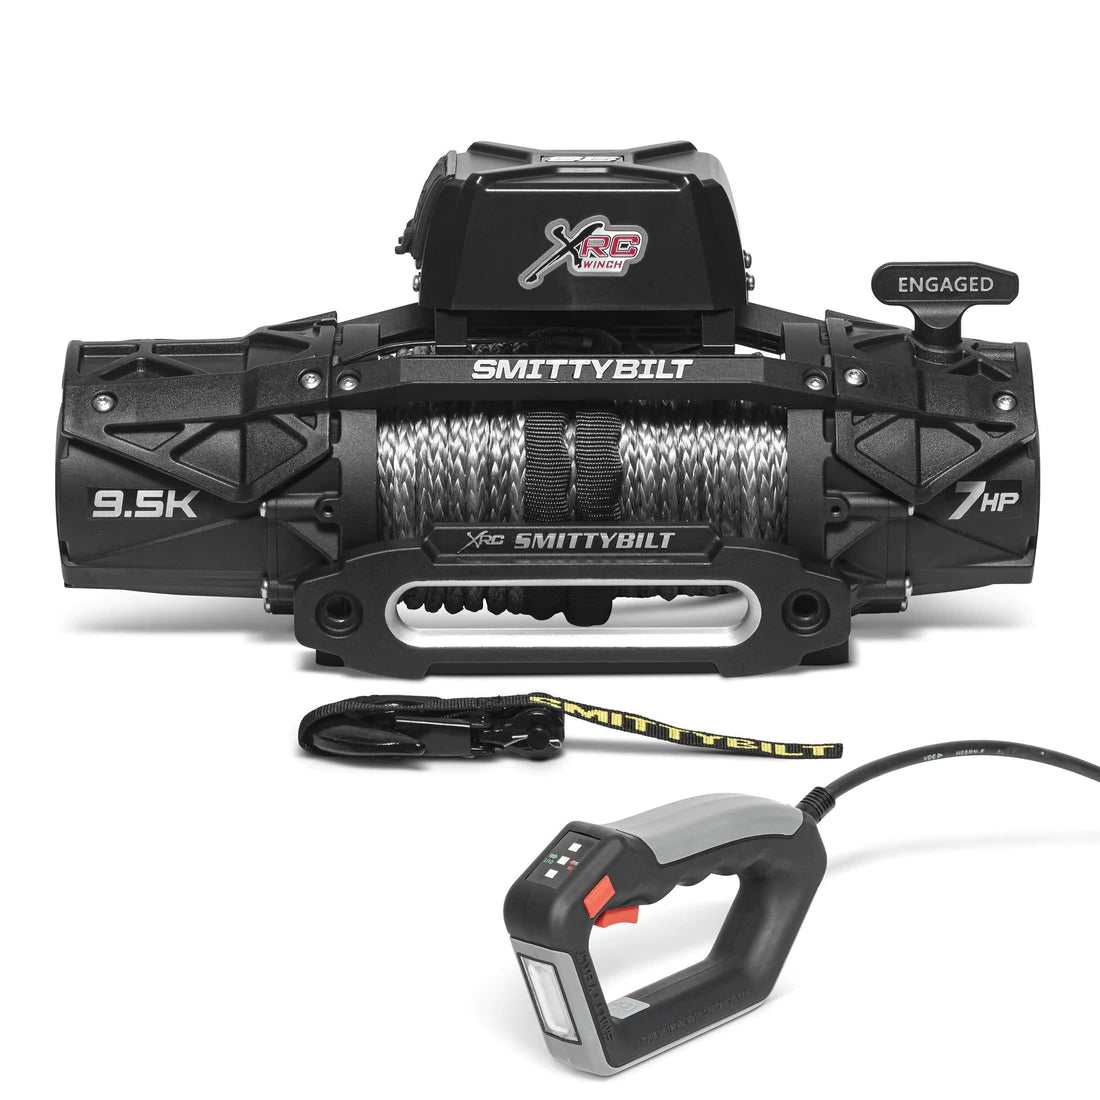 Smittybilt 98695 XRC GEN3 9.5K Comp Series Winch with Synthetic Cable